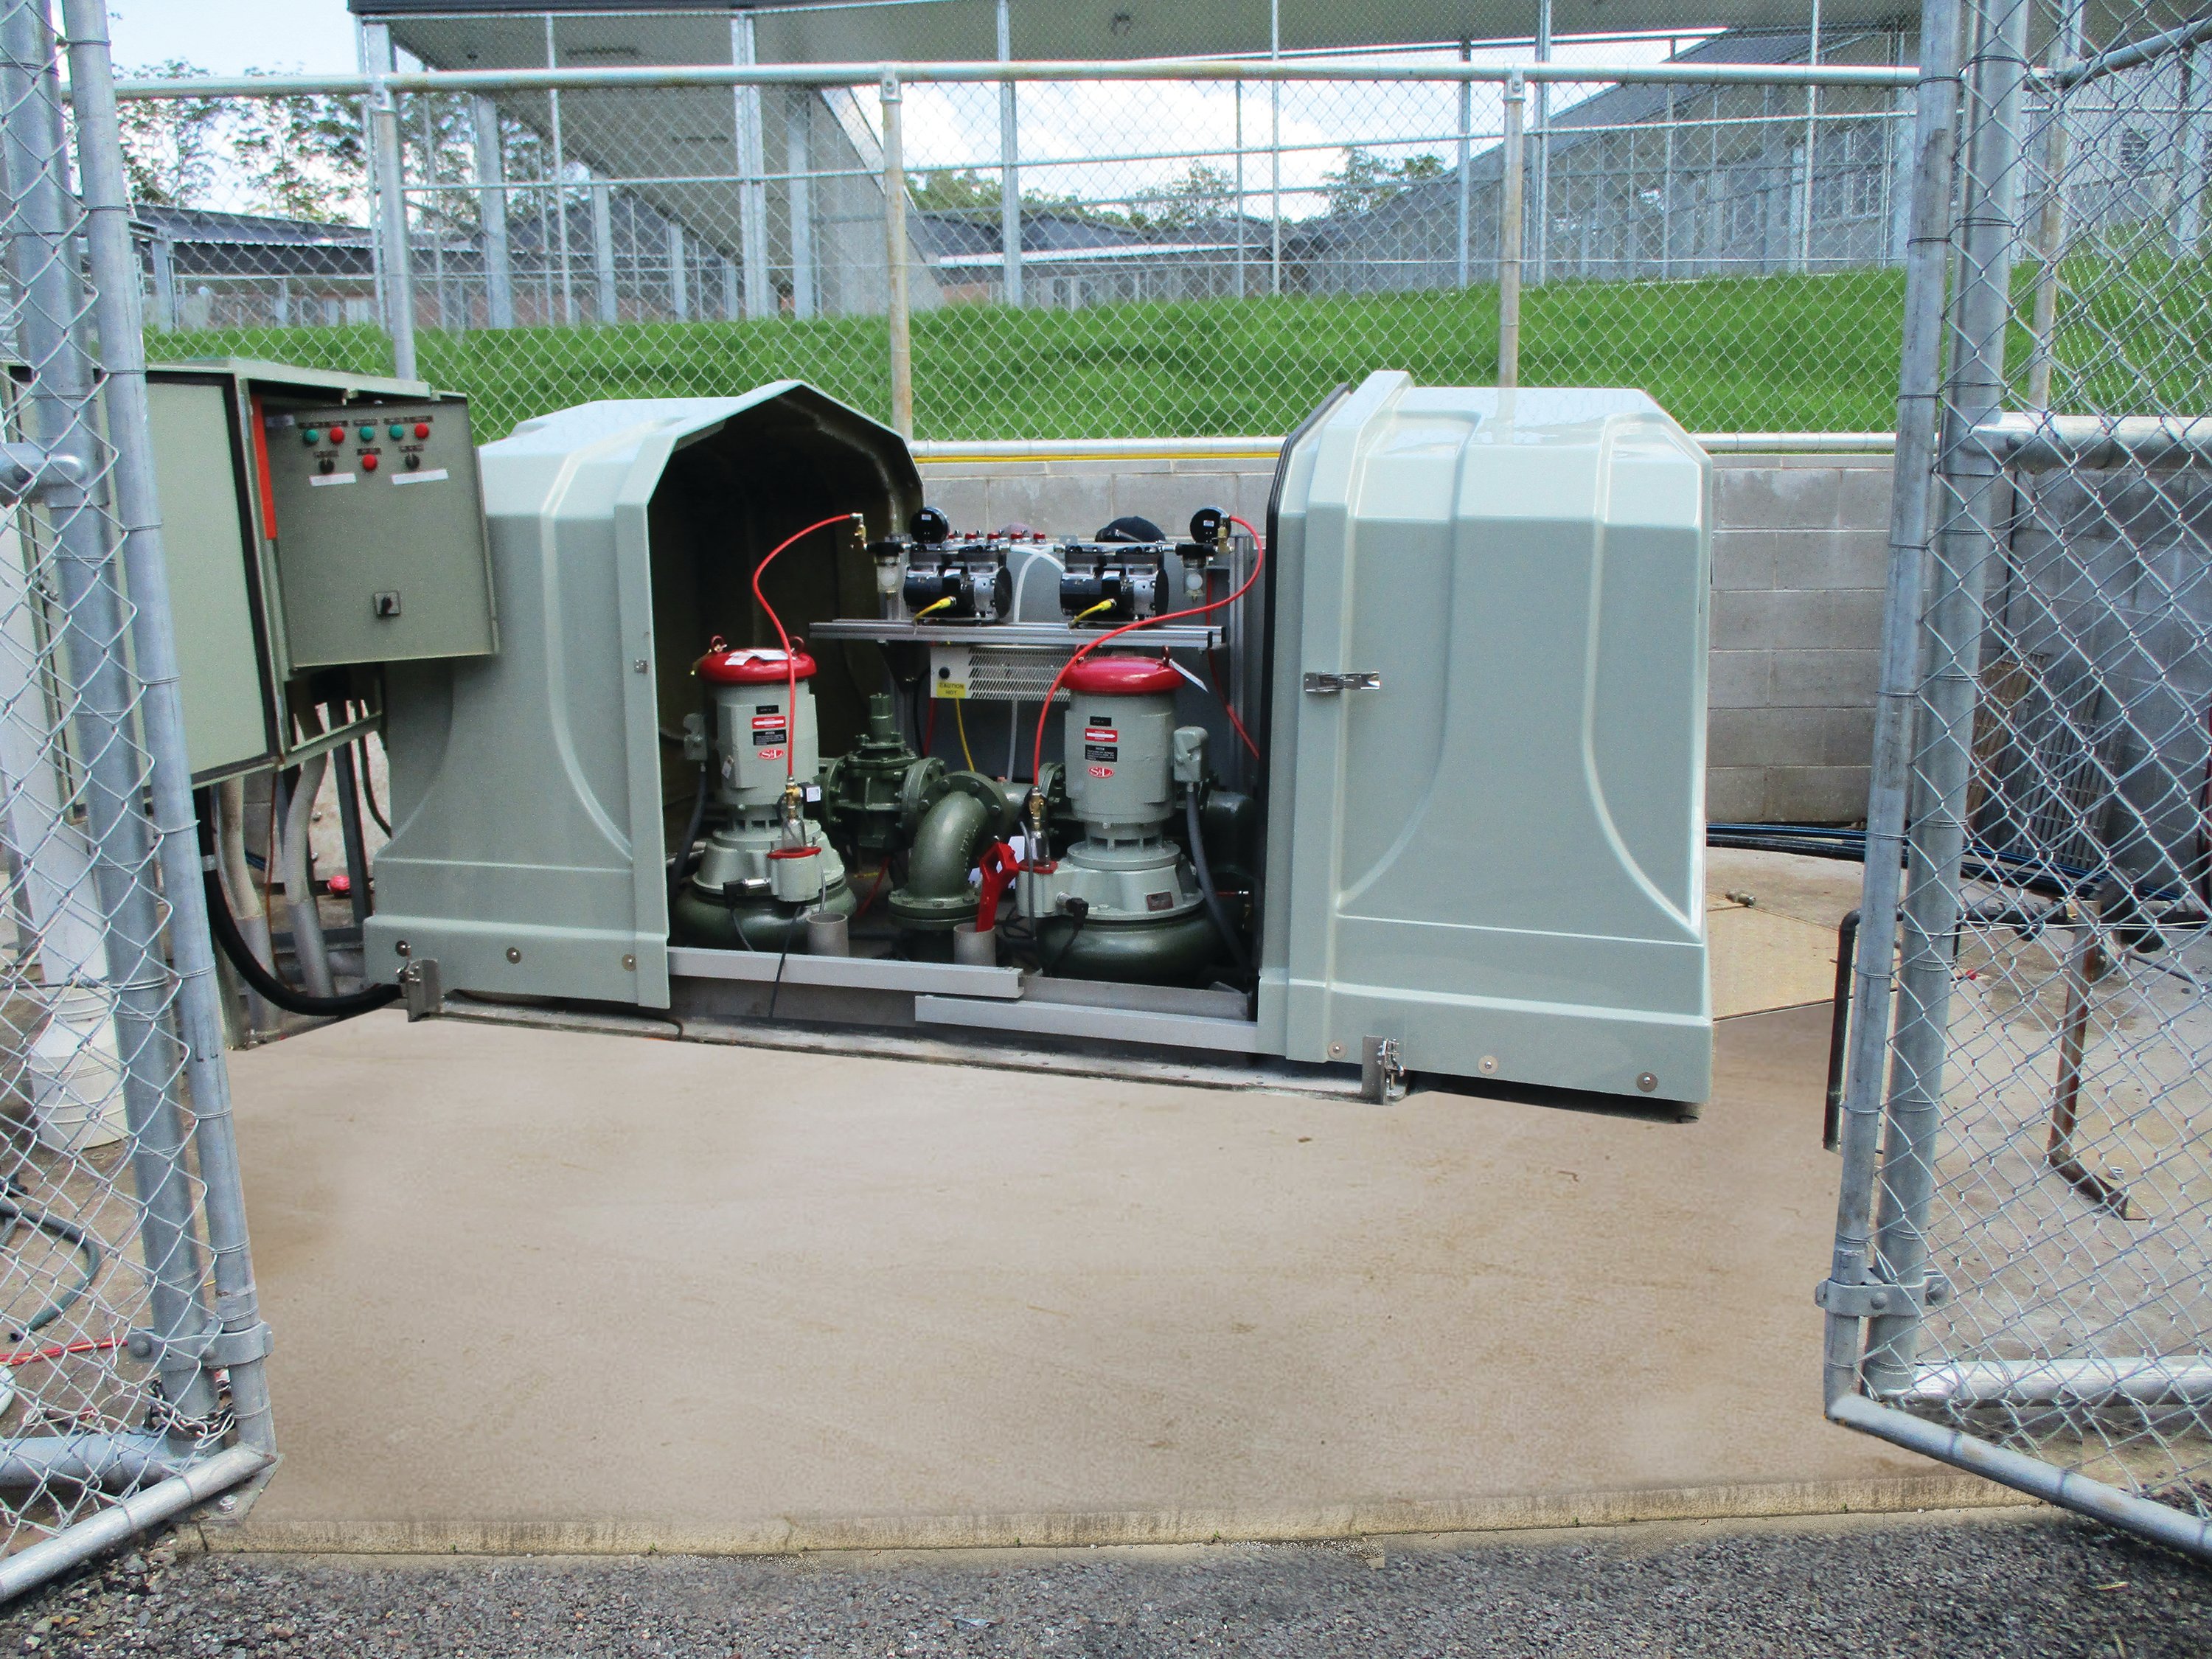 Figure 2: The EVERLAST™ above-ground pumping station at this prison facility simplifies operator access and eliminates confined space concerns by mounting a complete lift station at grade level in a quick-access enclosure. Source: Smith & Loveless